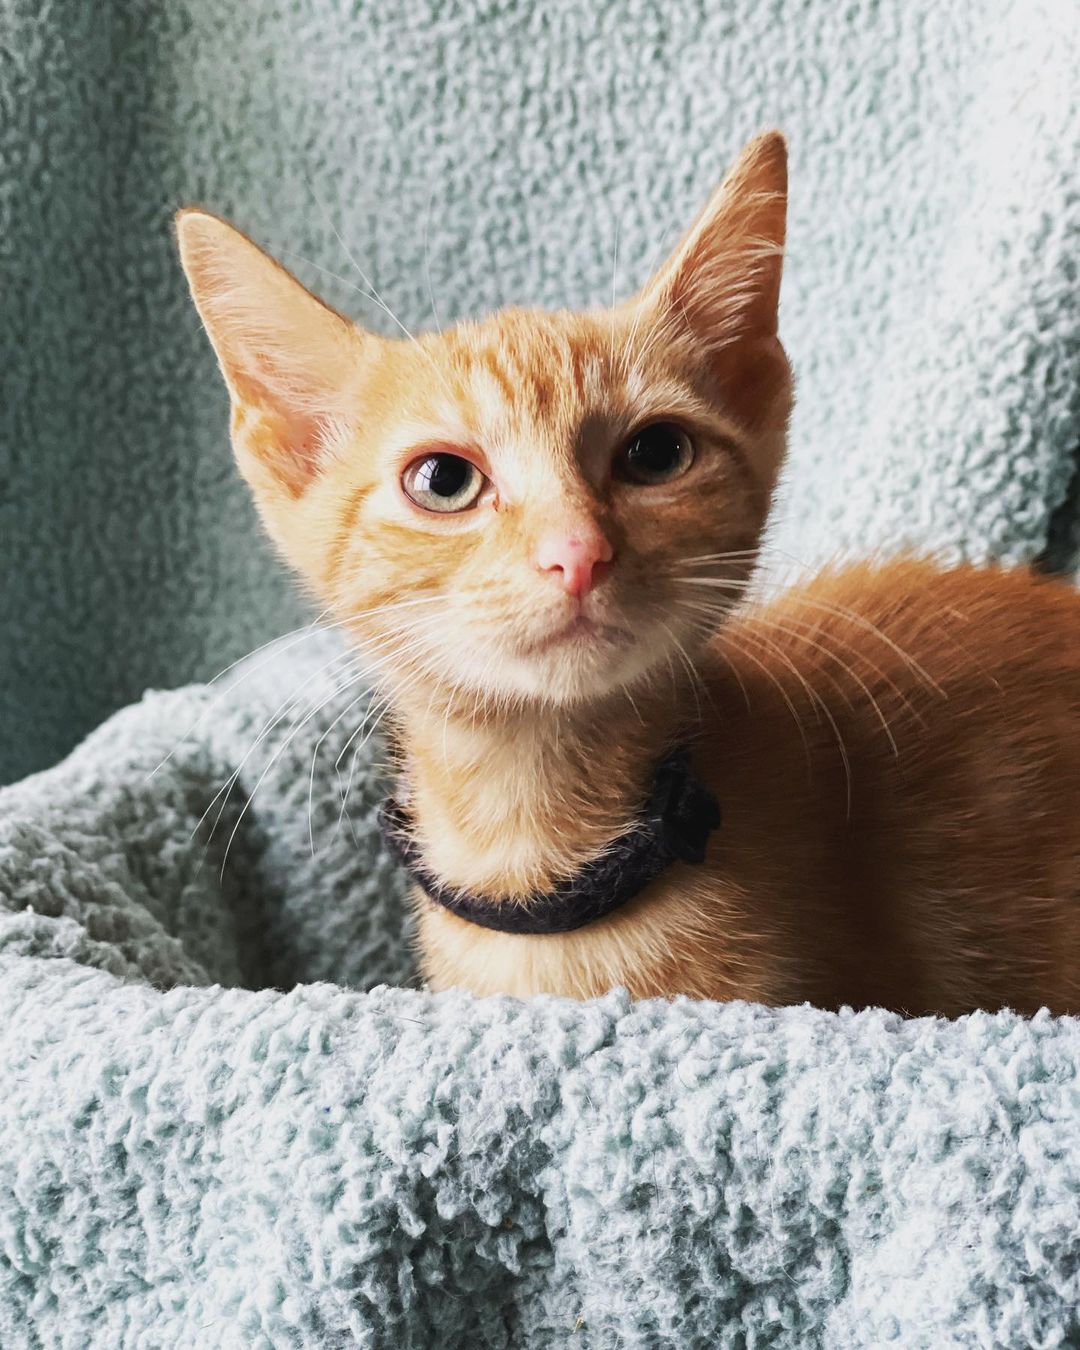 <a target='_blank' href='https://www.instagram.com/explore/tags/adoptable/'>#adoptable</a> kittens. They’re SO loving. <a target='_blank' href='https://www.instagram.com/explore/tags/adoptme/'>#adoptme</a> <a target='_blank' href='https://www.instagram.com/explore/tags/kittensofinstagram/'>#kittensofinstagram</a>